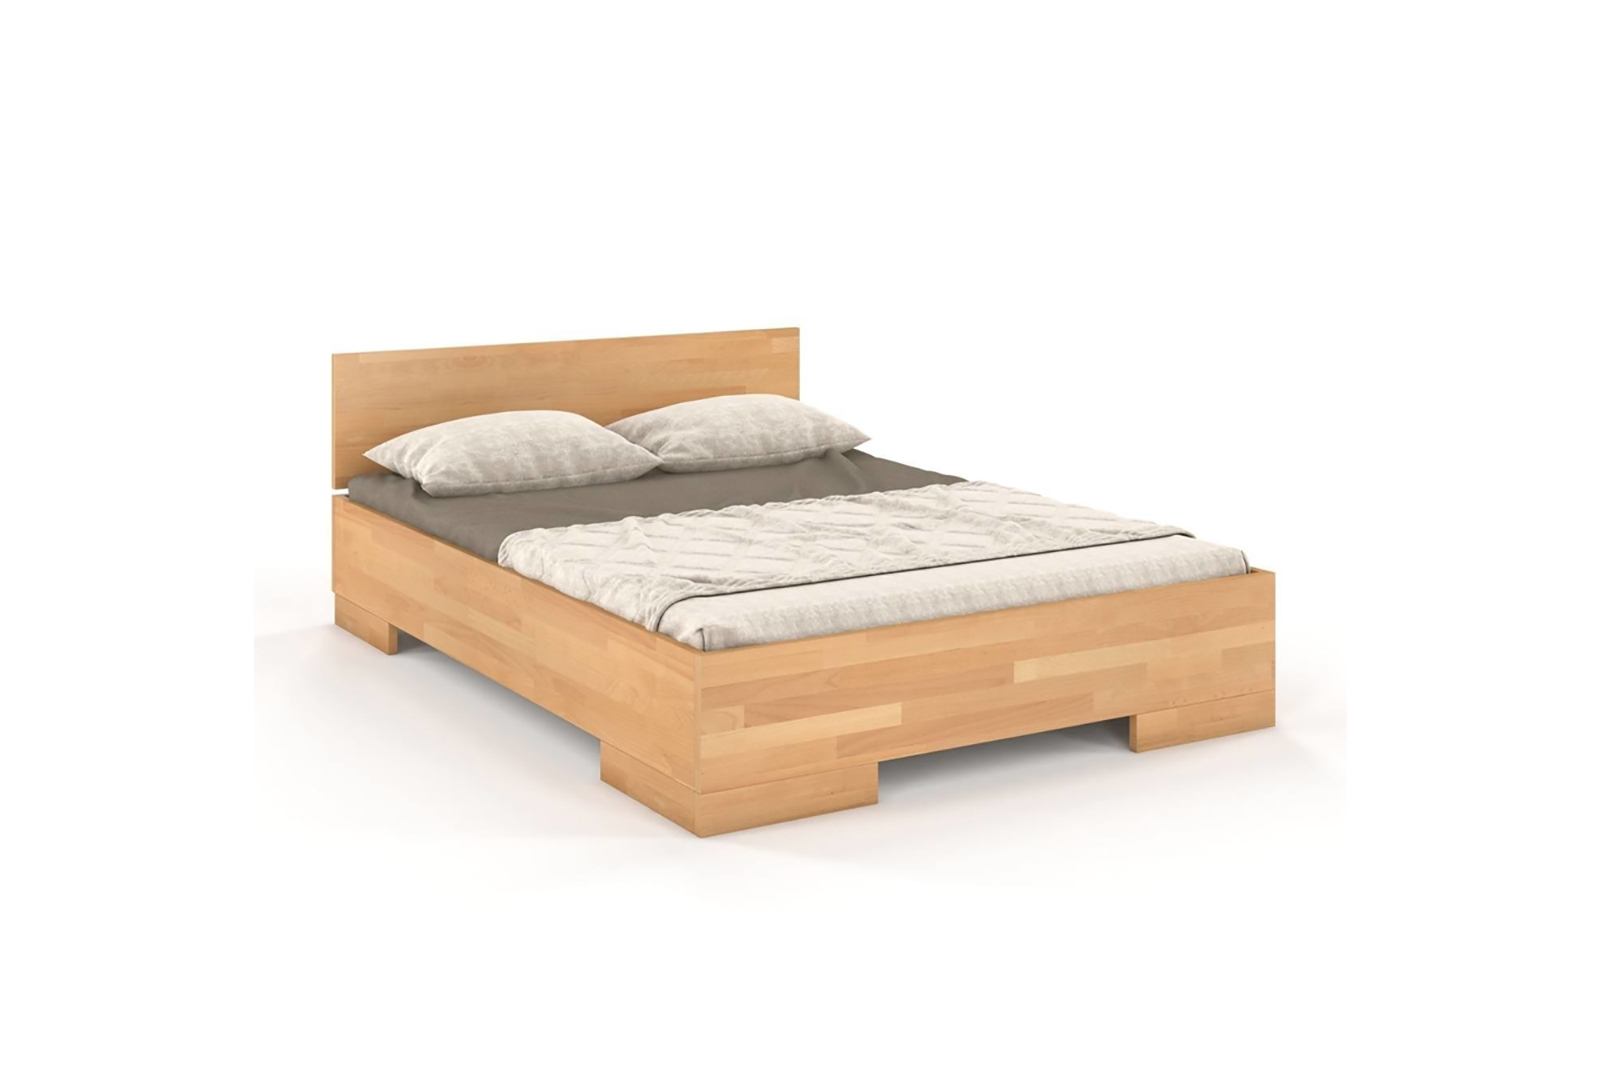 WOODEN BEECH BED WITH A BOX FOR BEDDING SKANDICA SPECTRUM MAXI & ST 1